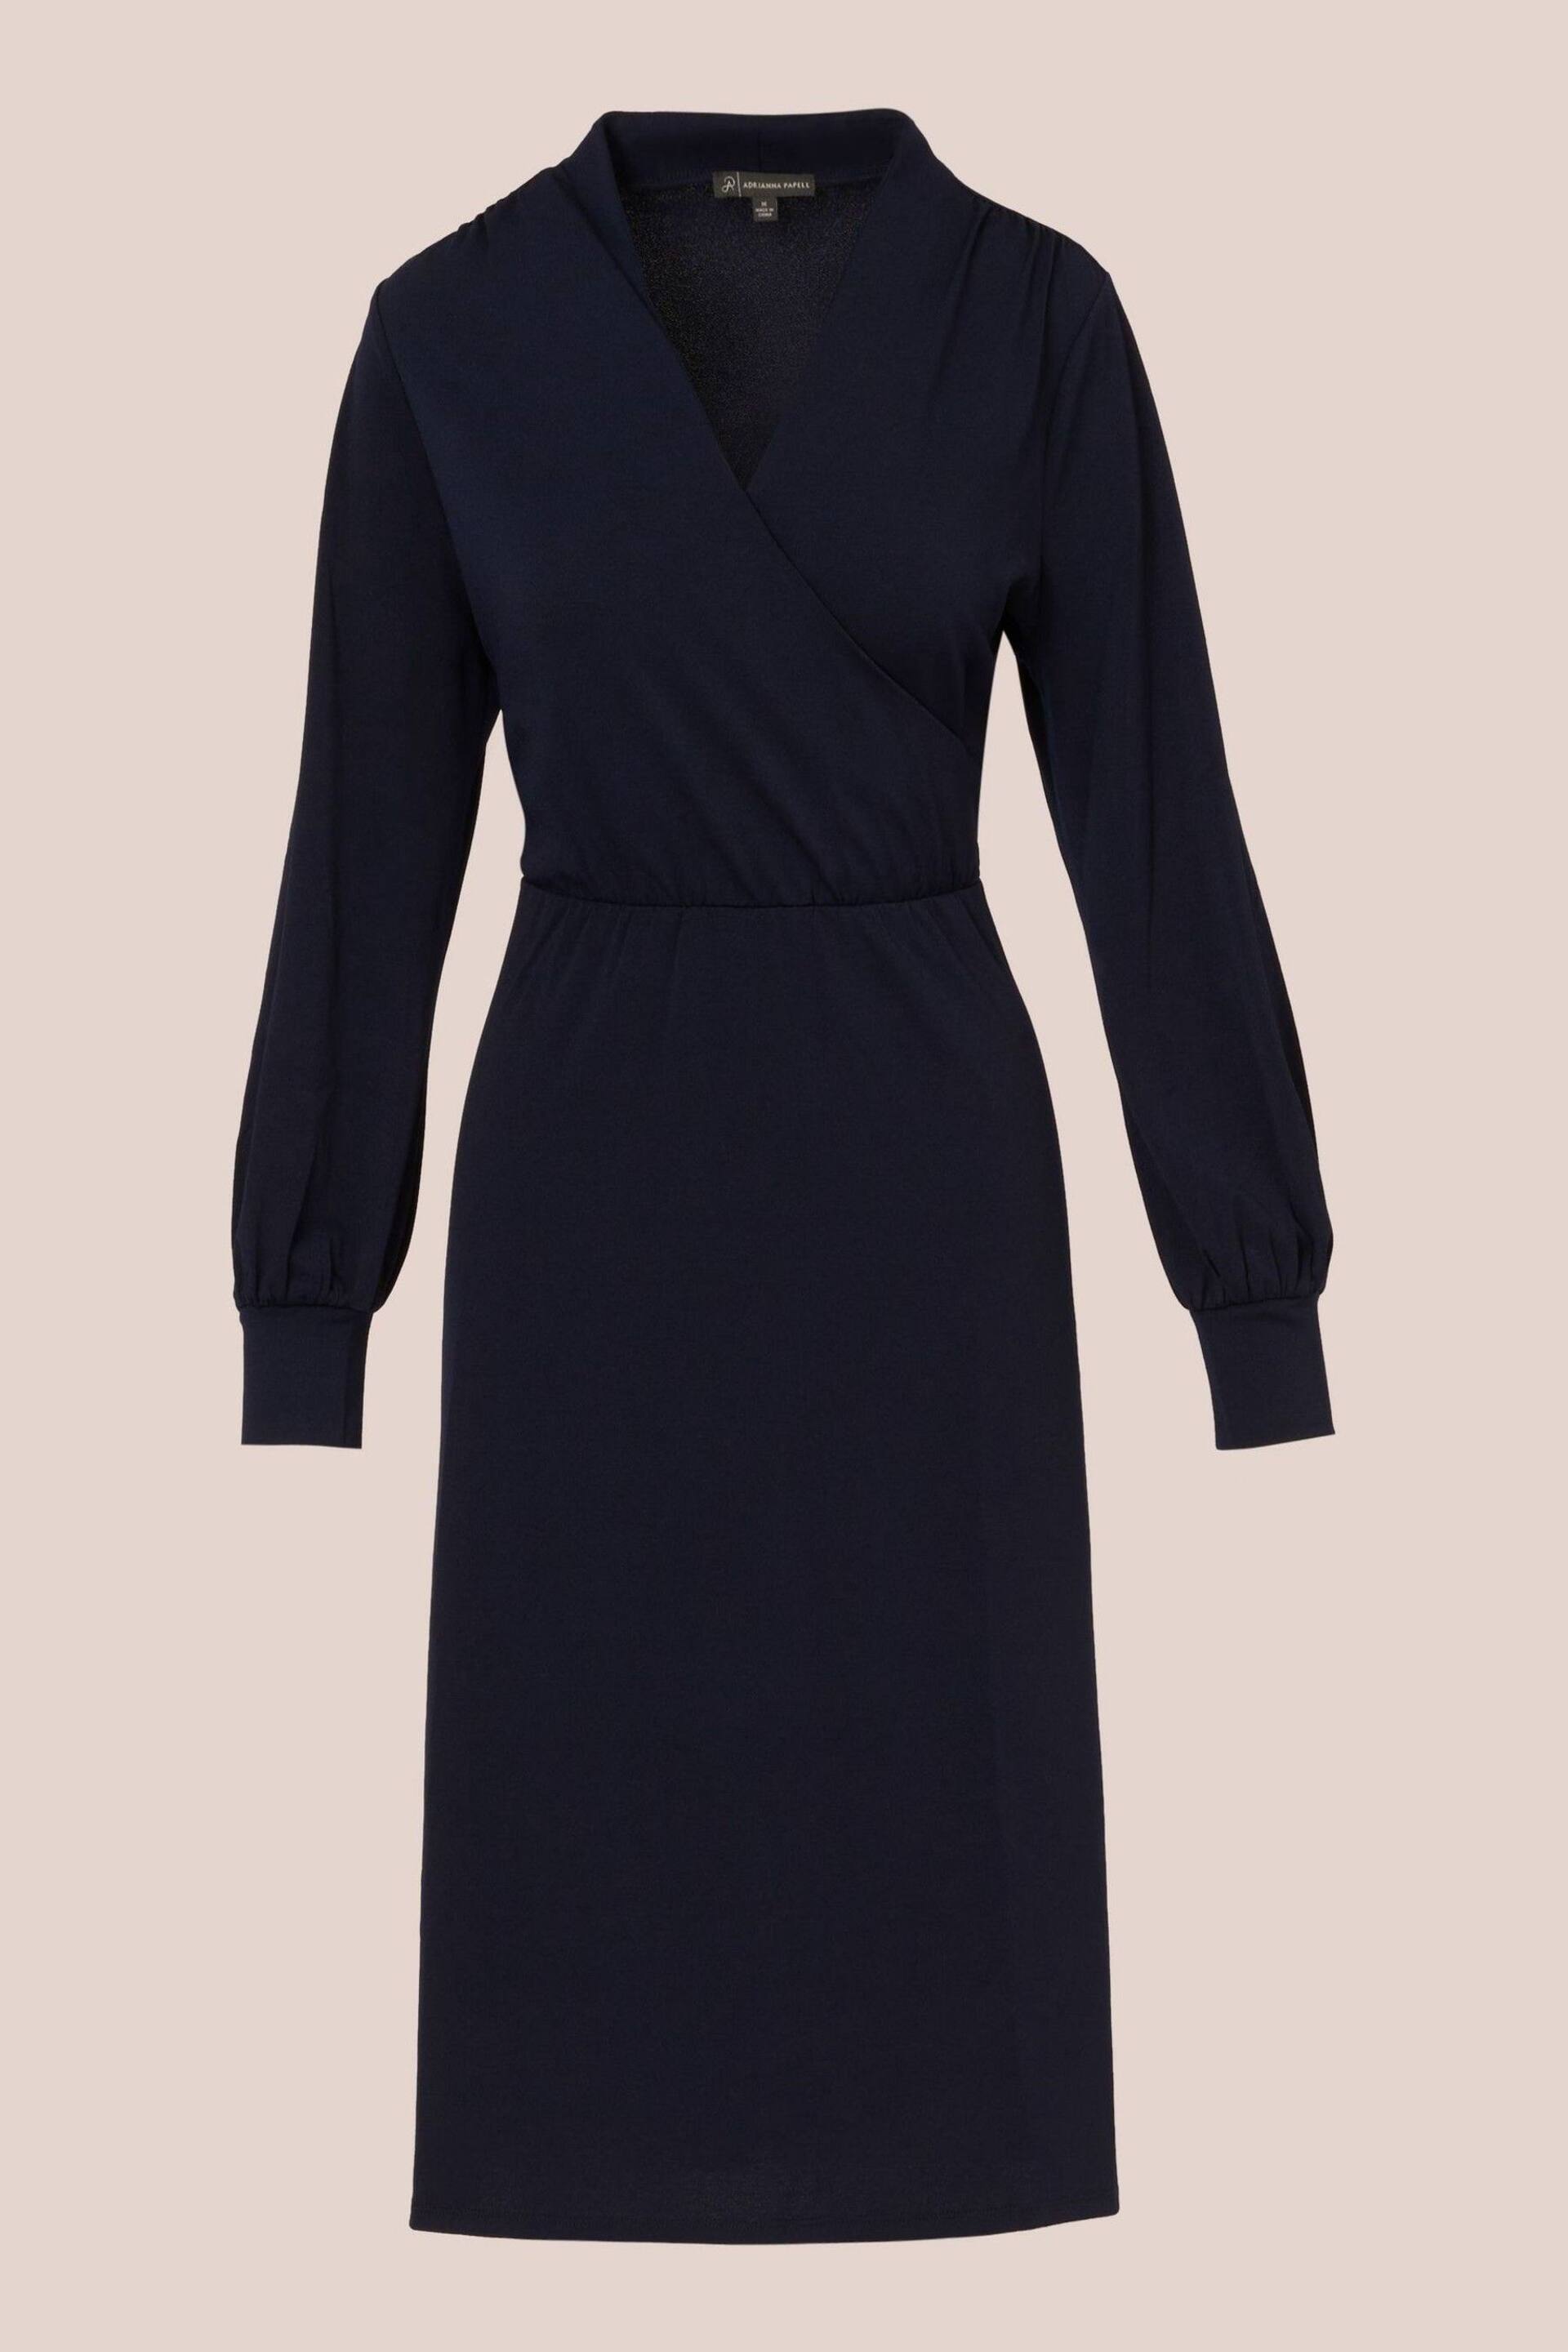 Adrianna Papell Blue Long Sleeve Wrap Dress - Image 6 of 7